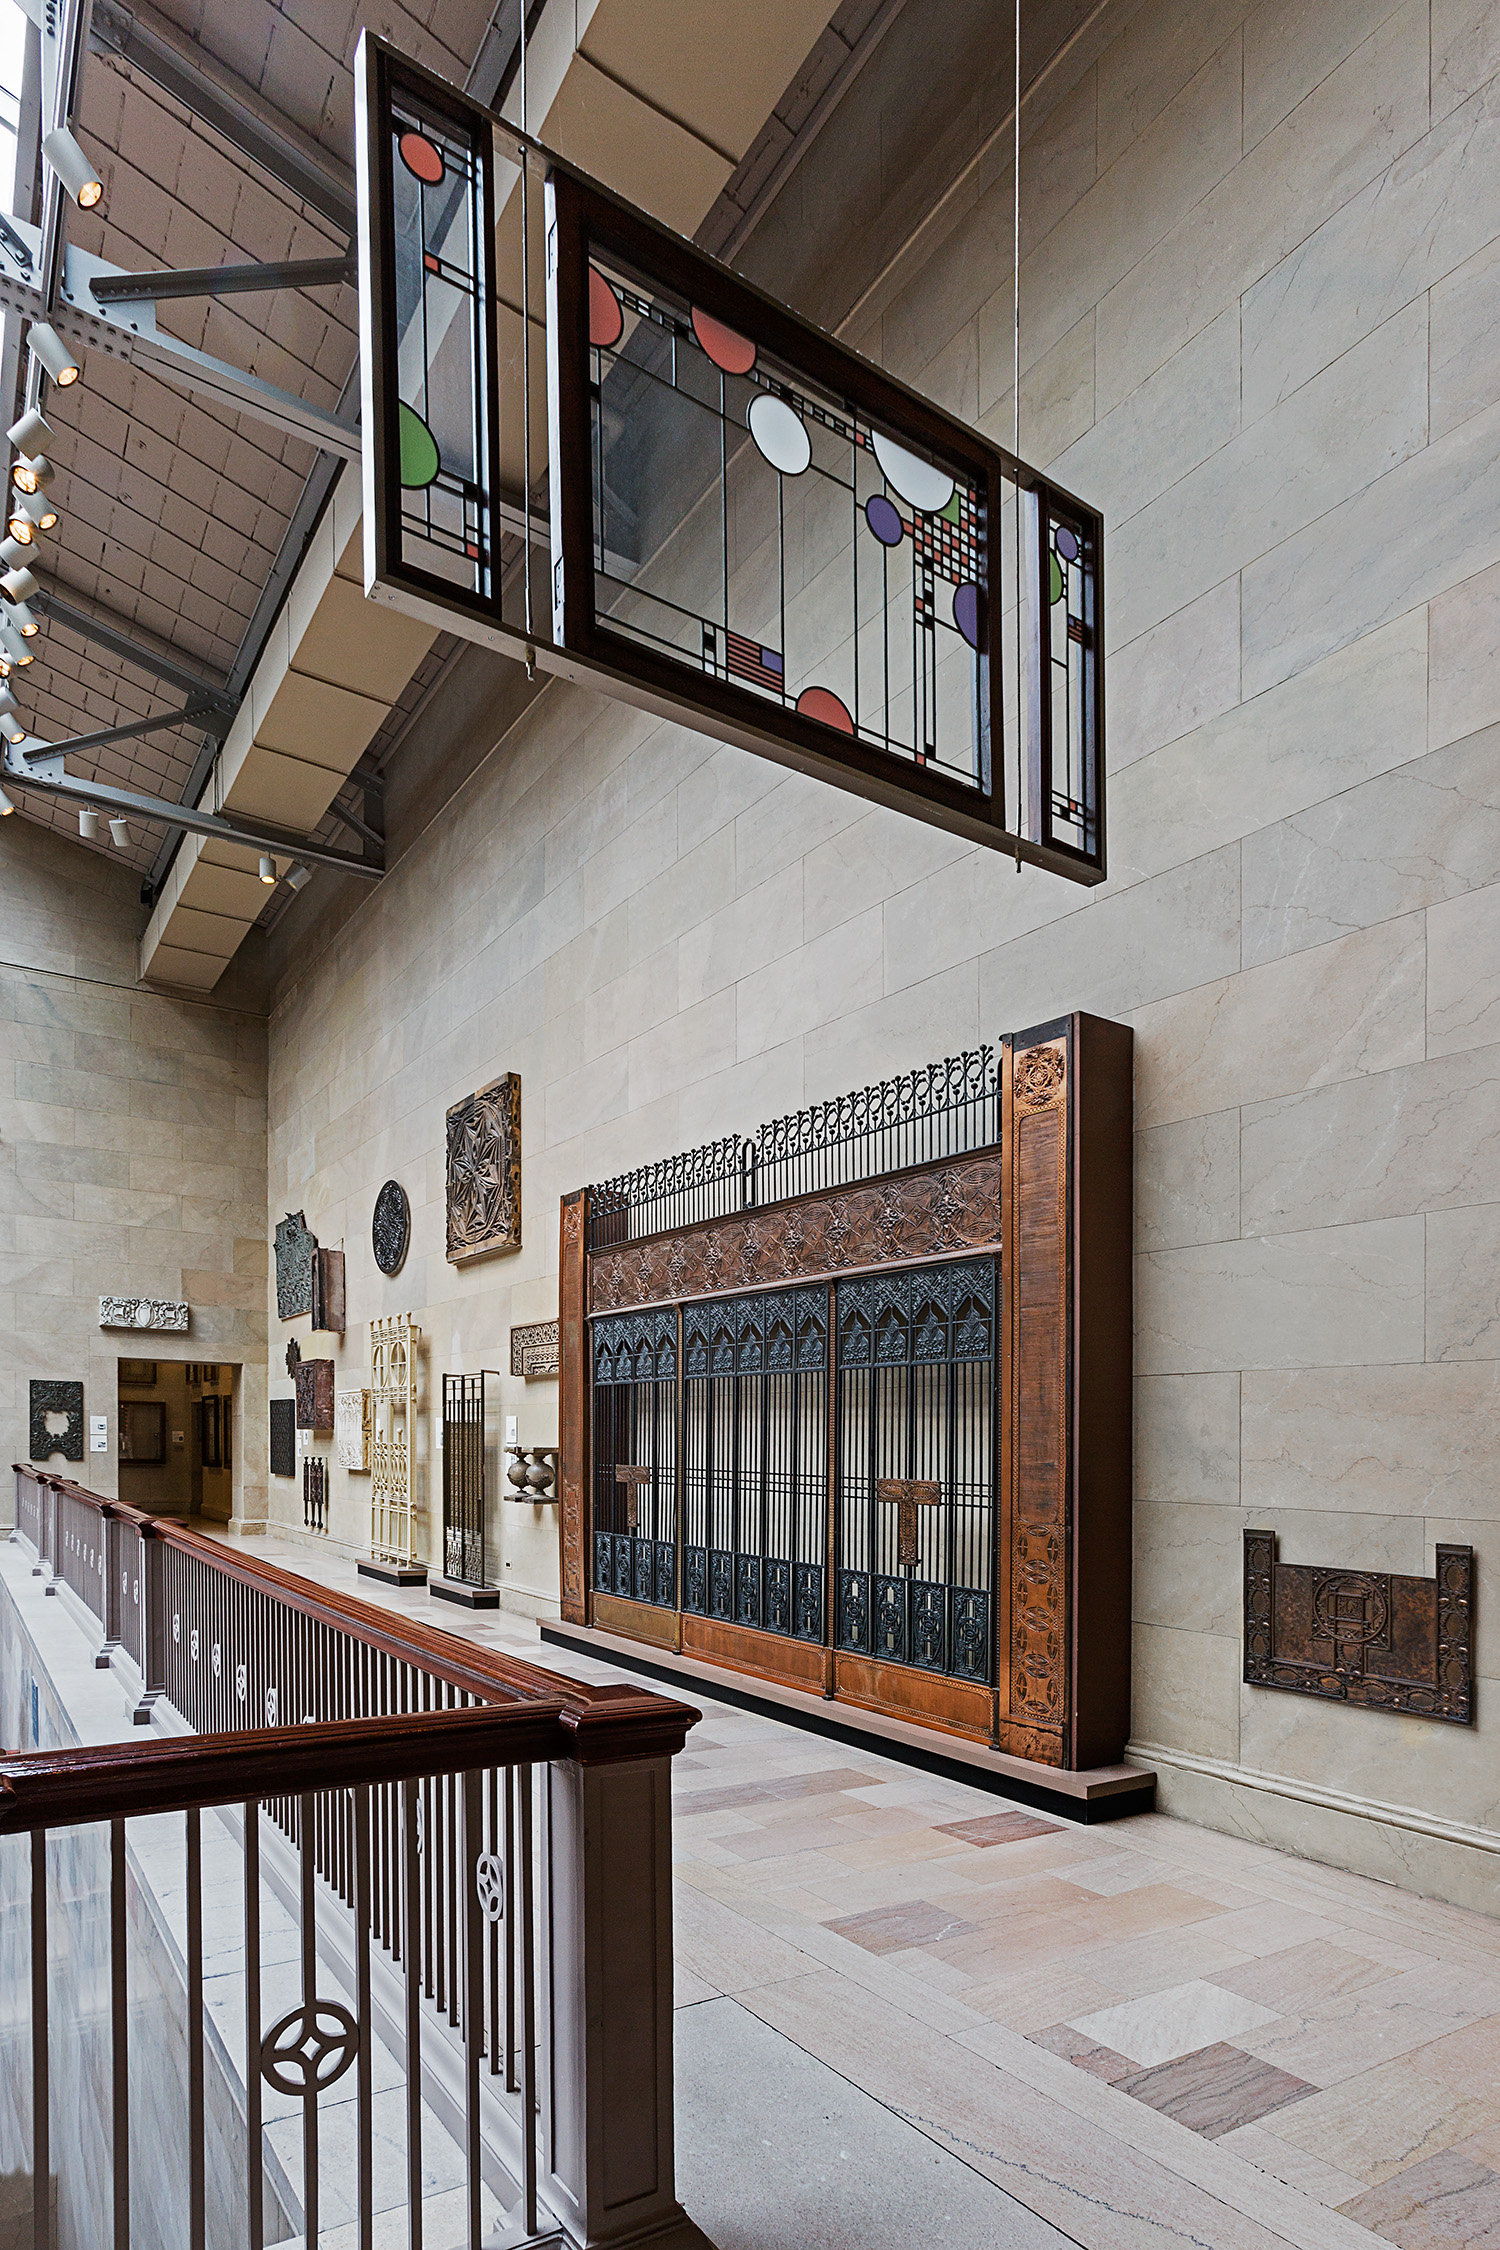 Art Institute of Chicago : Early Chicago Architectual Fragments